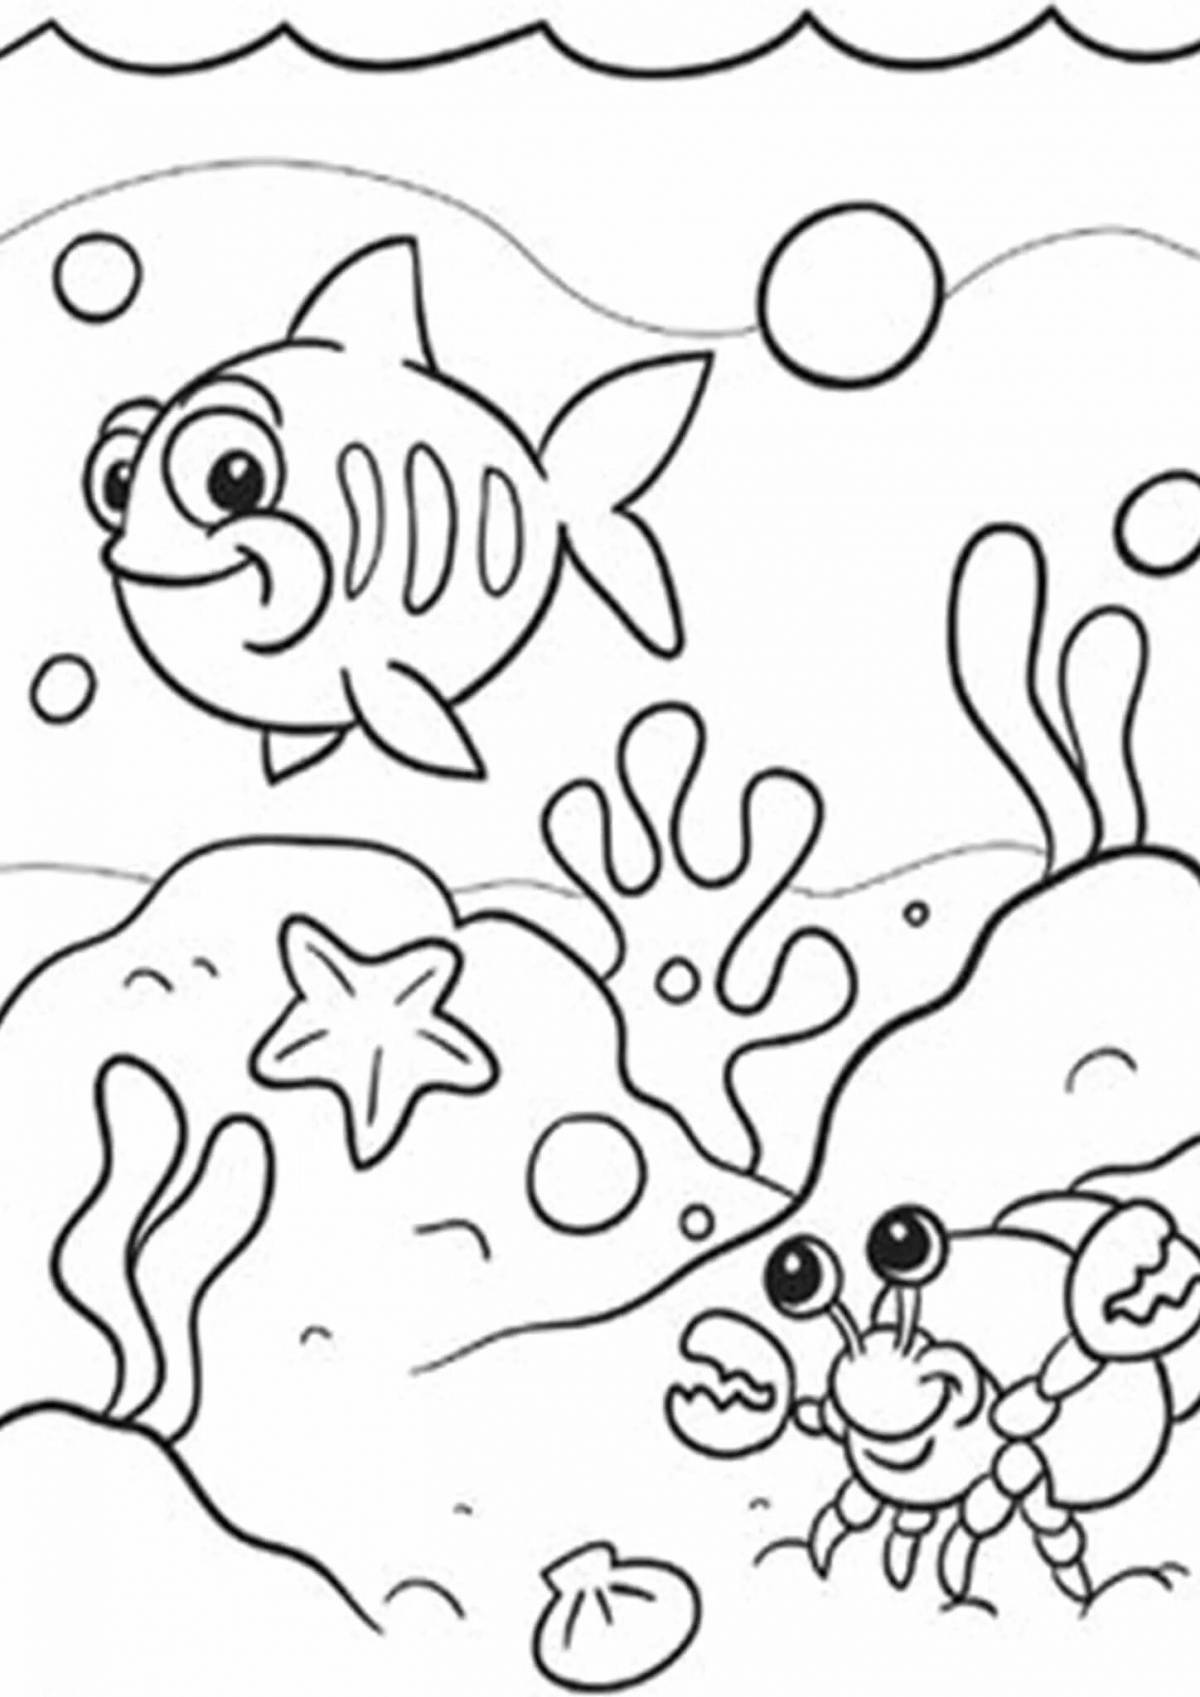 Adorable drawing of the water world